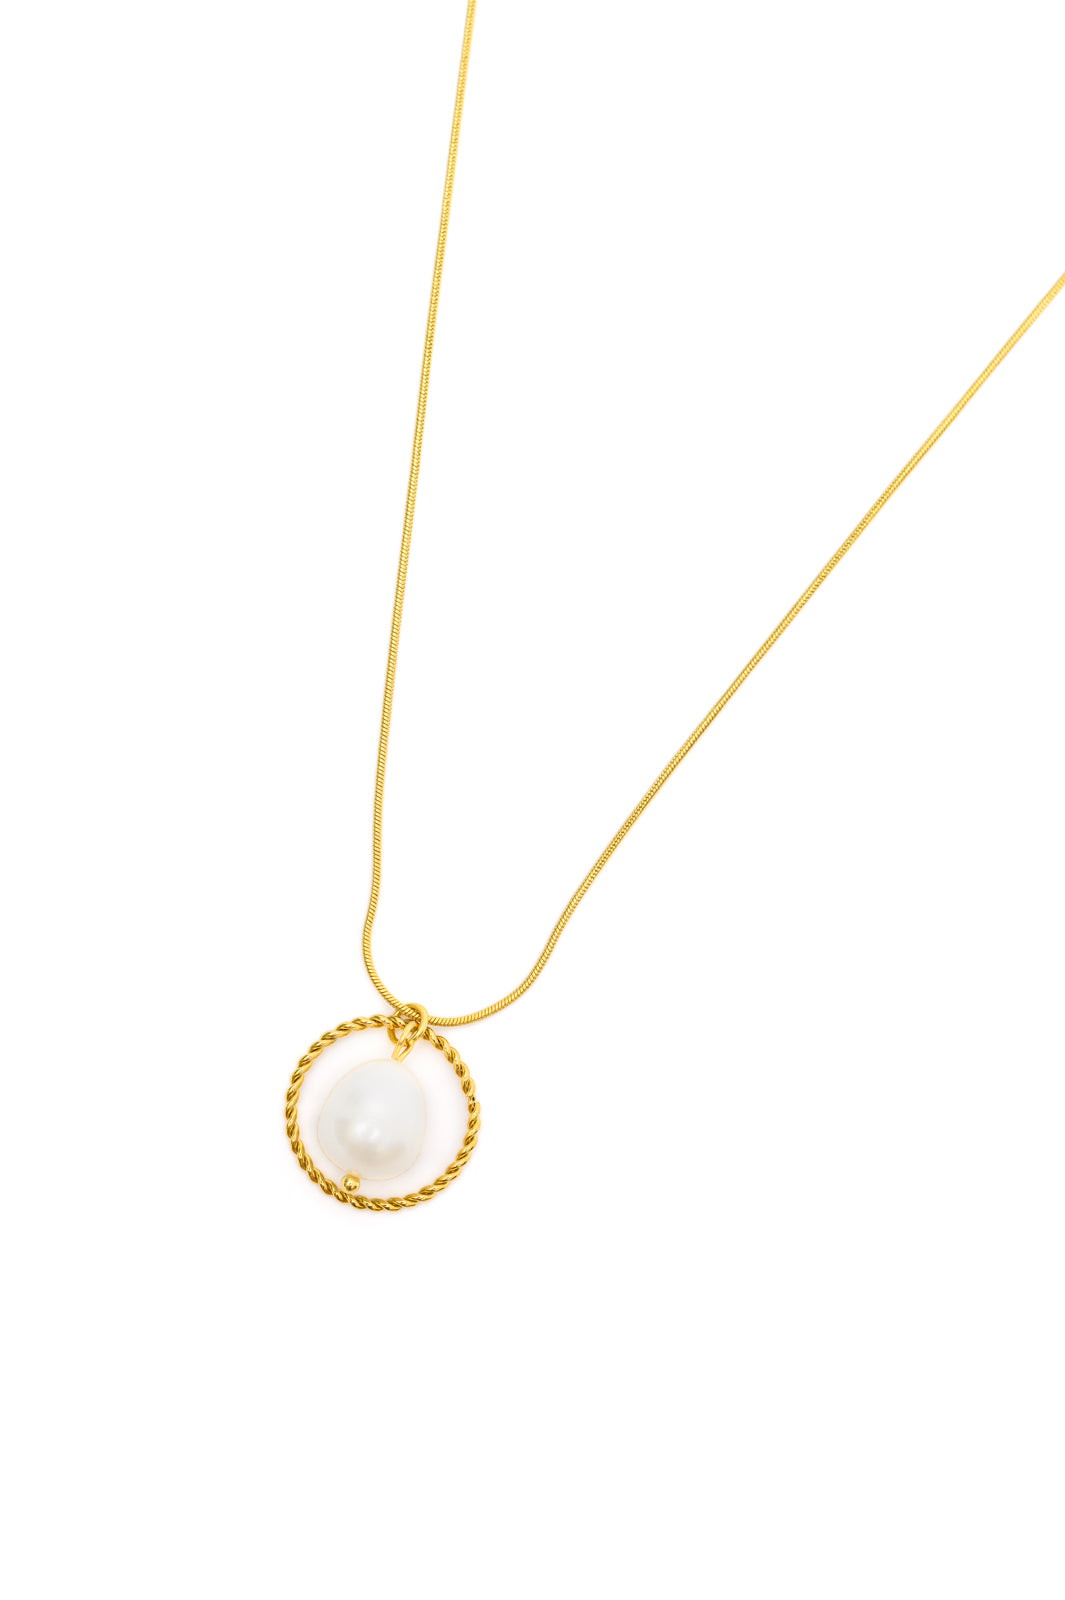 Feel captivated by this timeless Center of the World Pearl Pendant Necklace, crafted with 18k gold-plated stainless steel. Showcasing a free-hanging pearl, this necklace creates an elegant and sophisticated look that will never go out of style. Are you ready to make a lasting impression?